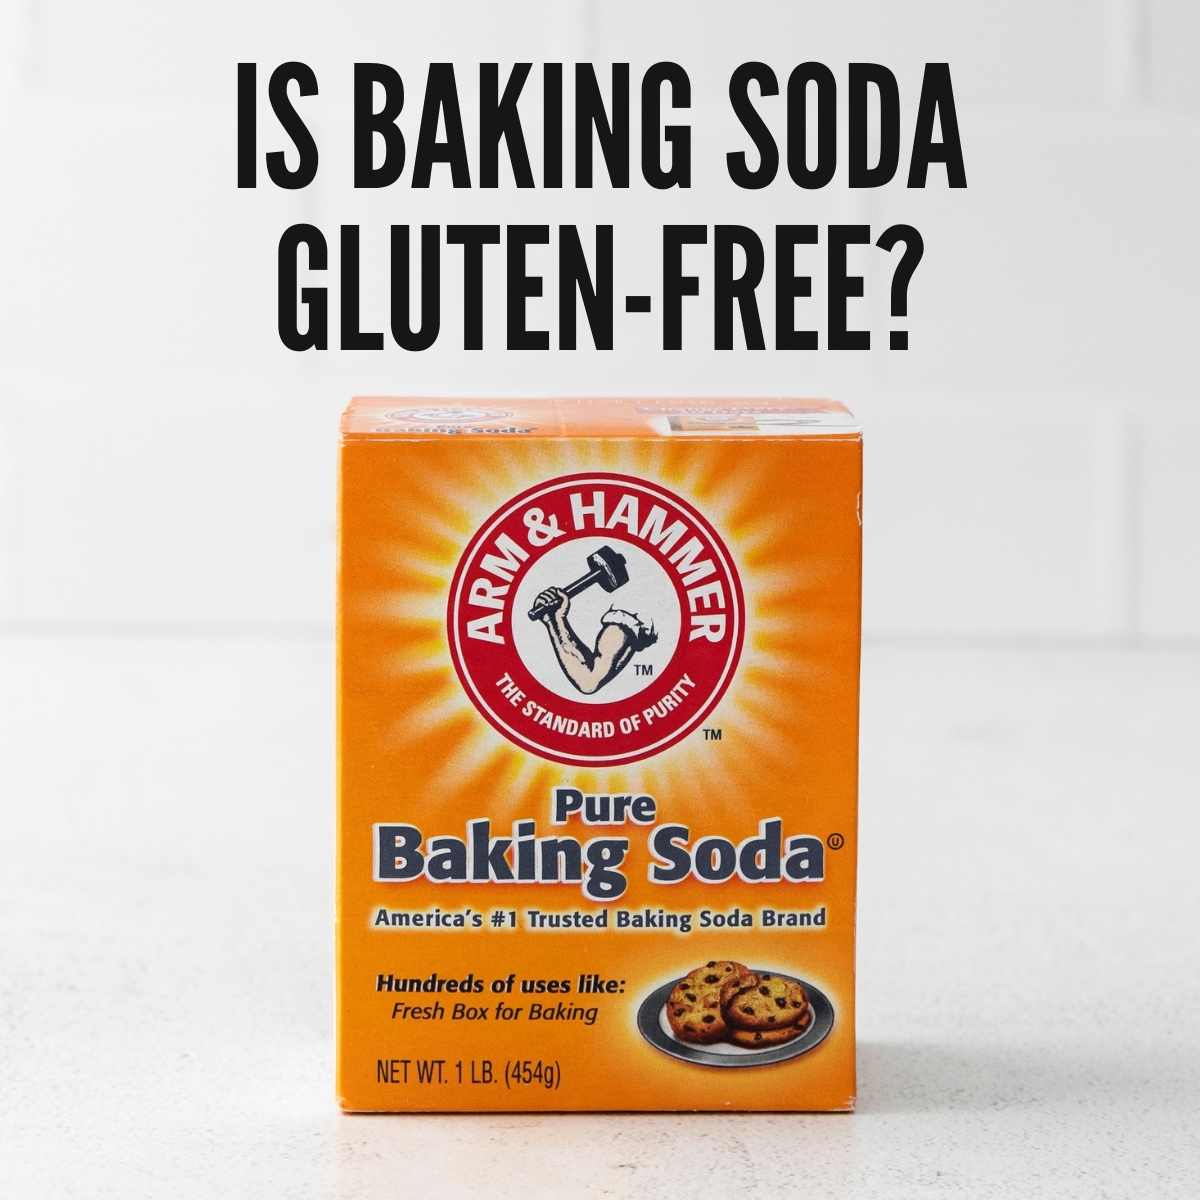 What Is Baking Soda?